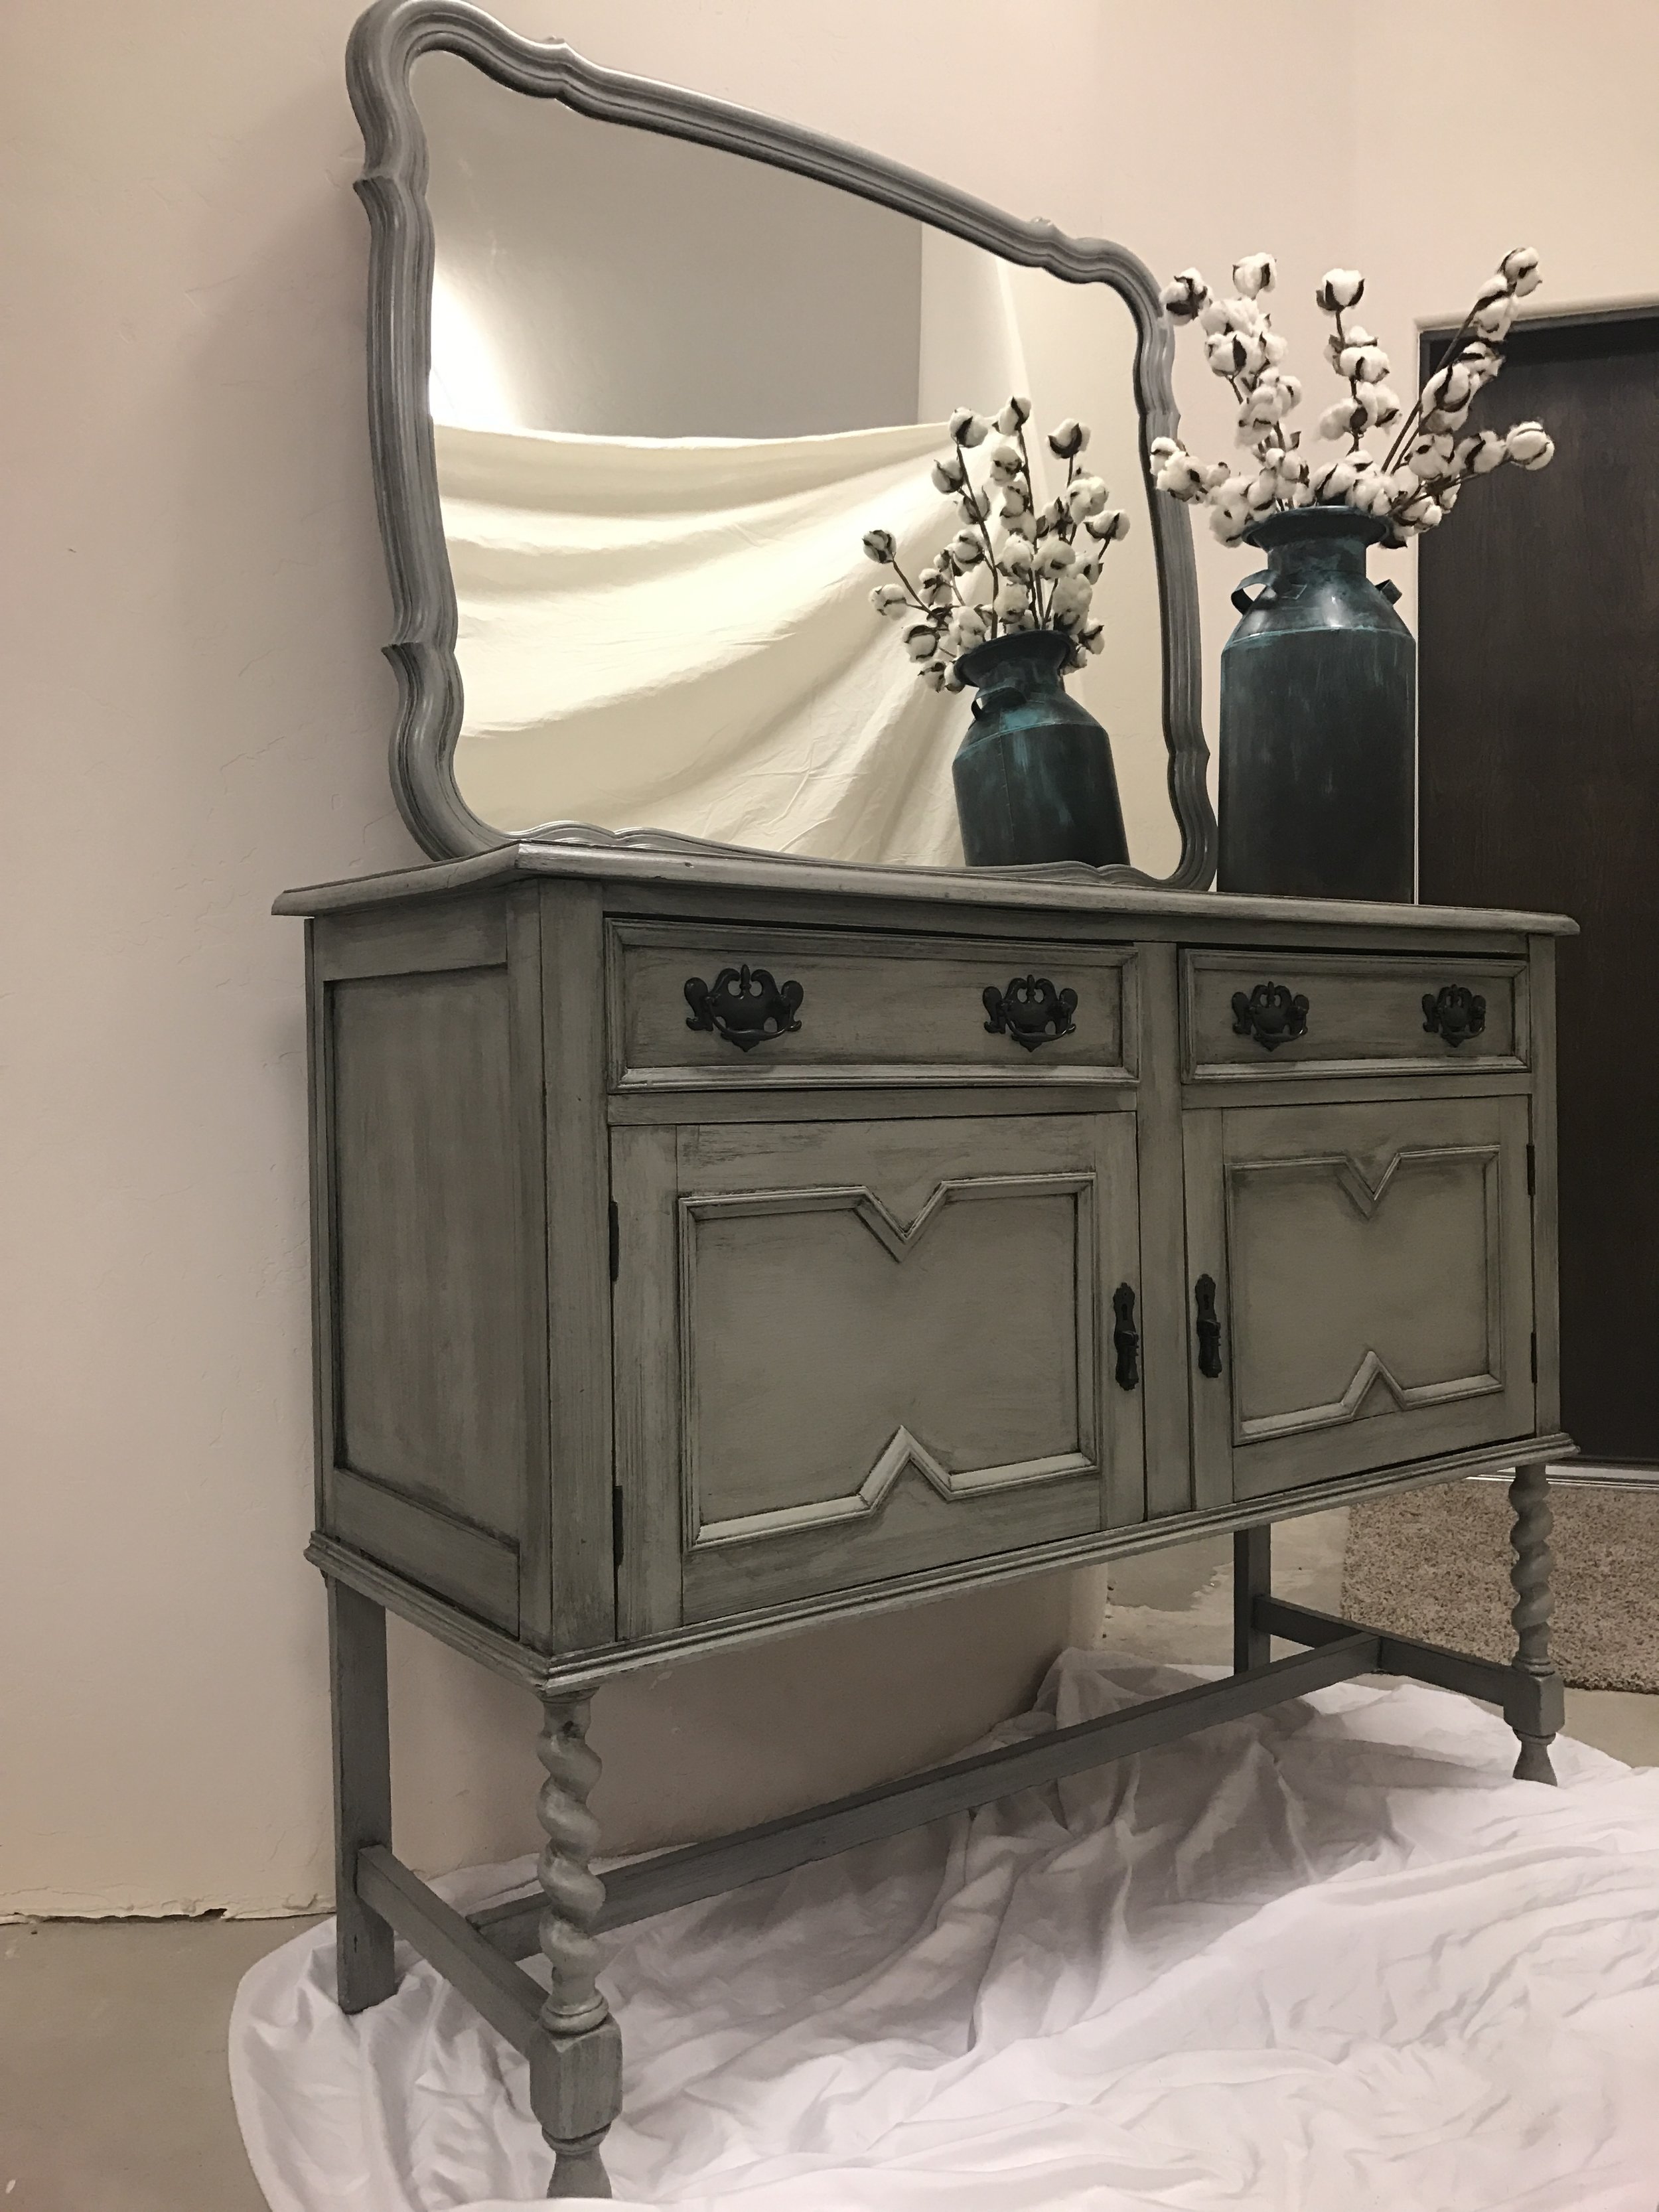 4 Ways to Antique Furniture — A Rustic Rose by Addie